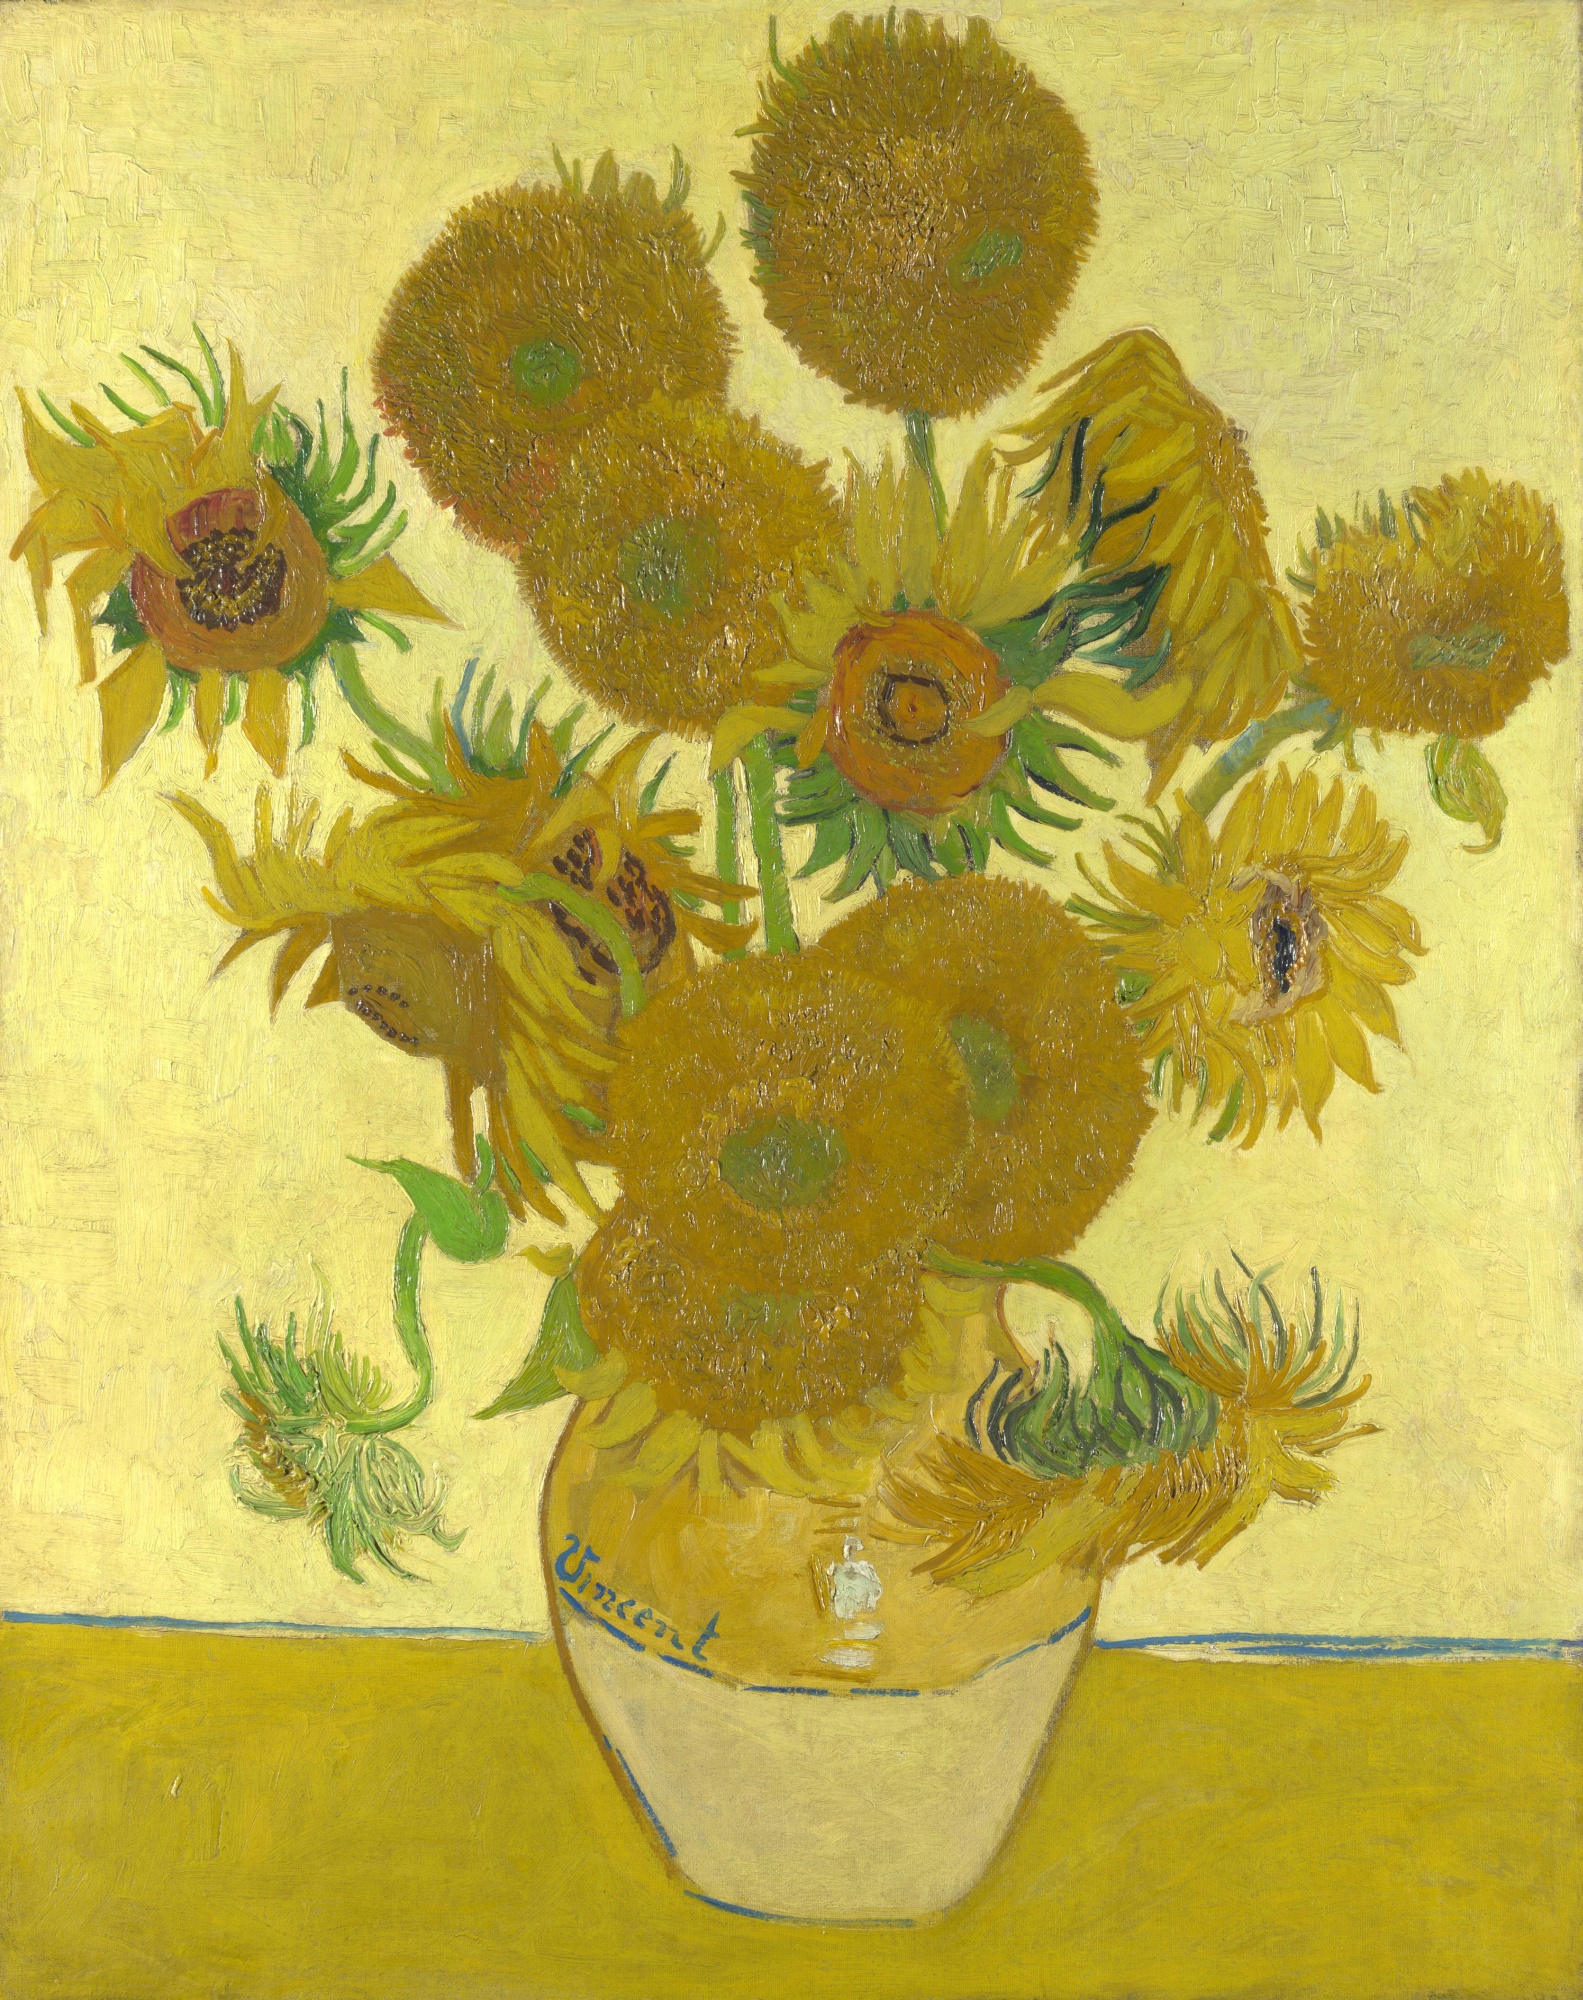 Vase-with-Fifteen-Sunflowers-by-Vincent-Van-Gogh